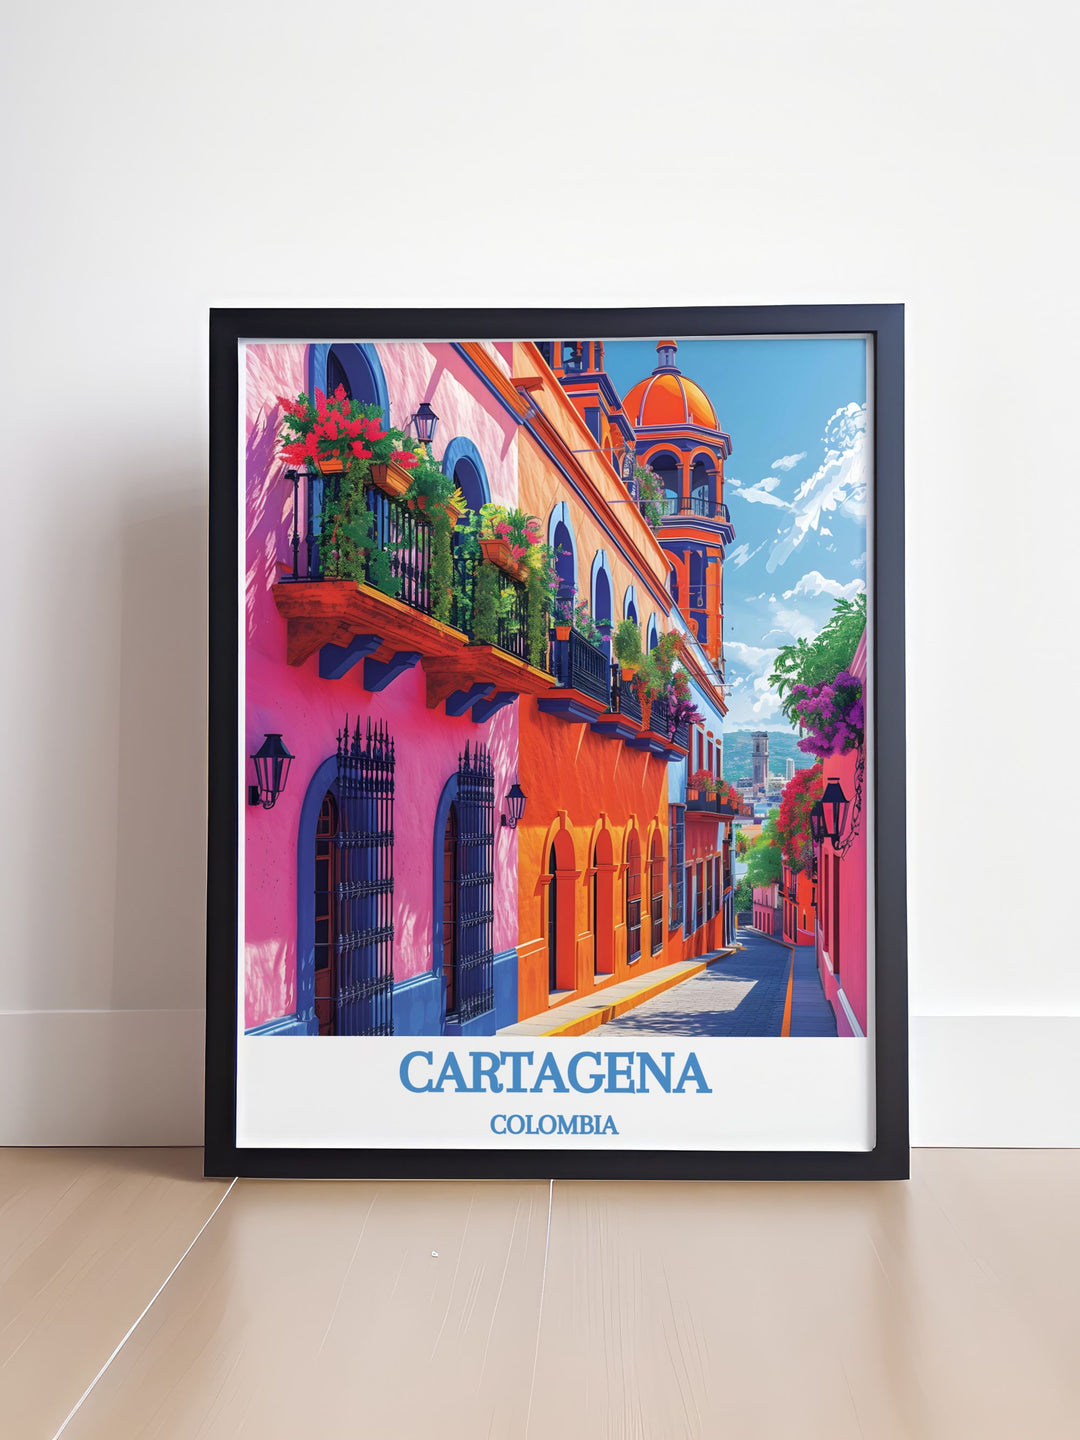 This travel poster beautifully depicts the cultural richness of Barrio Getsemaní, with its colorful street scenes and lively local life, making it an ideal piece for urban enthusiasts and collectors. Bring the spirit of Cartagena into your home with this exquisite print.